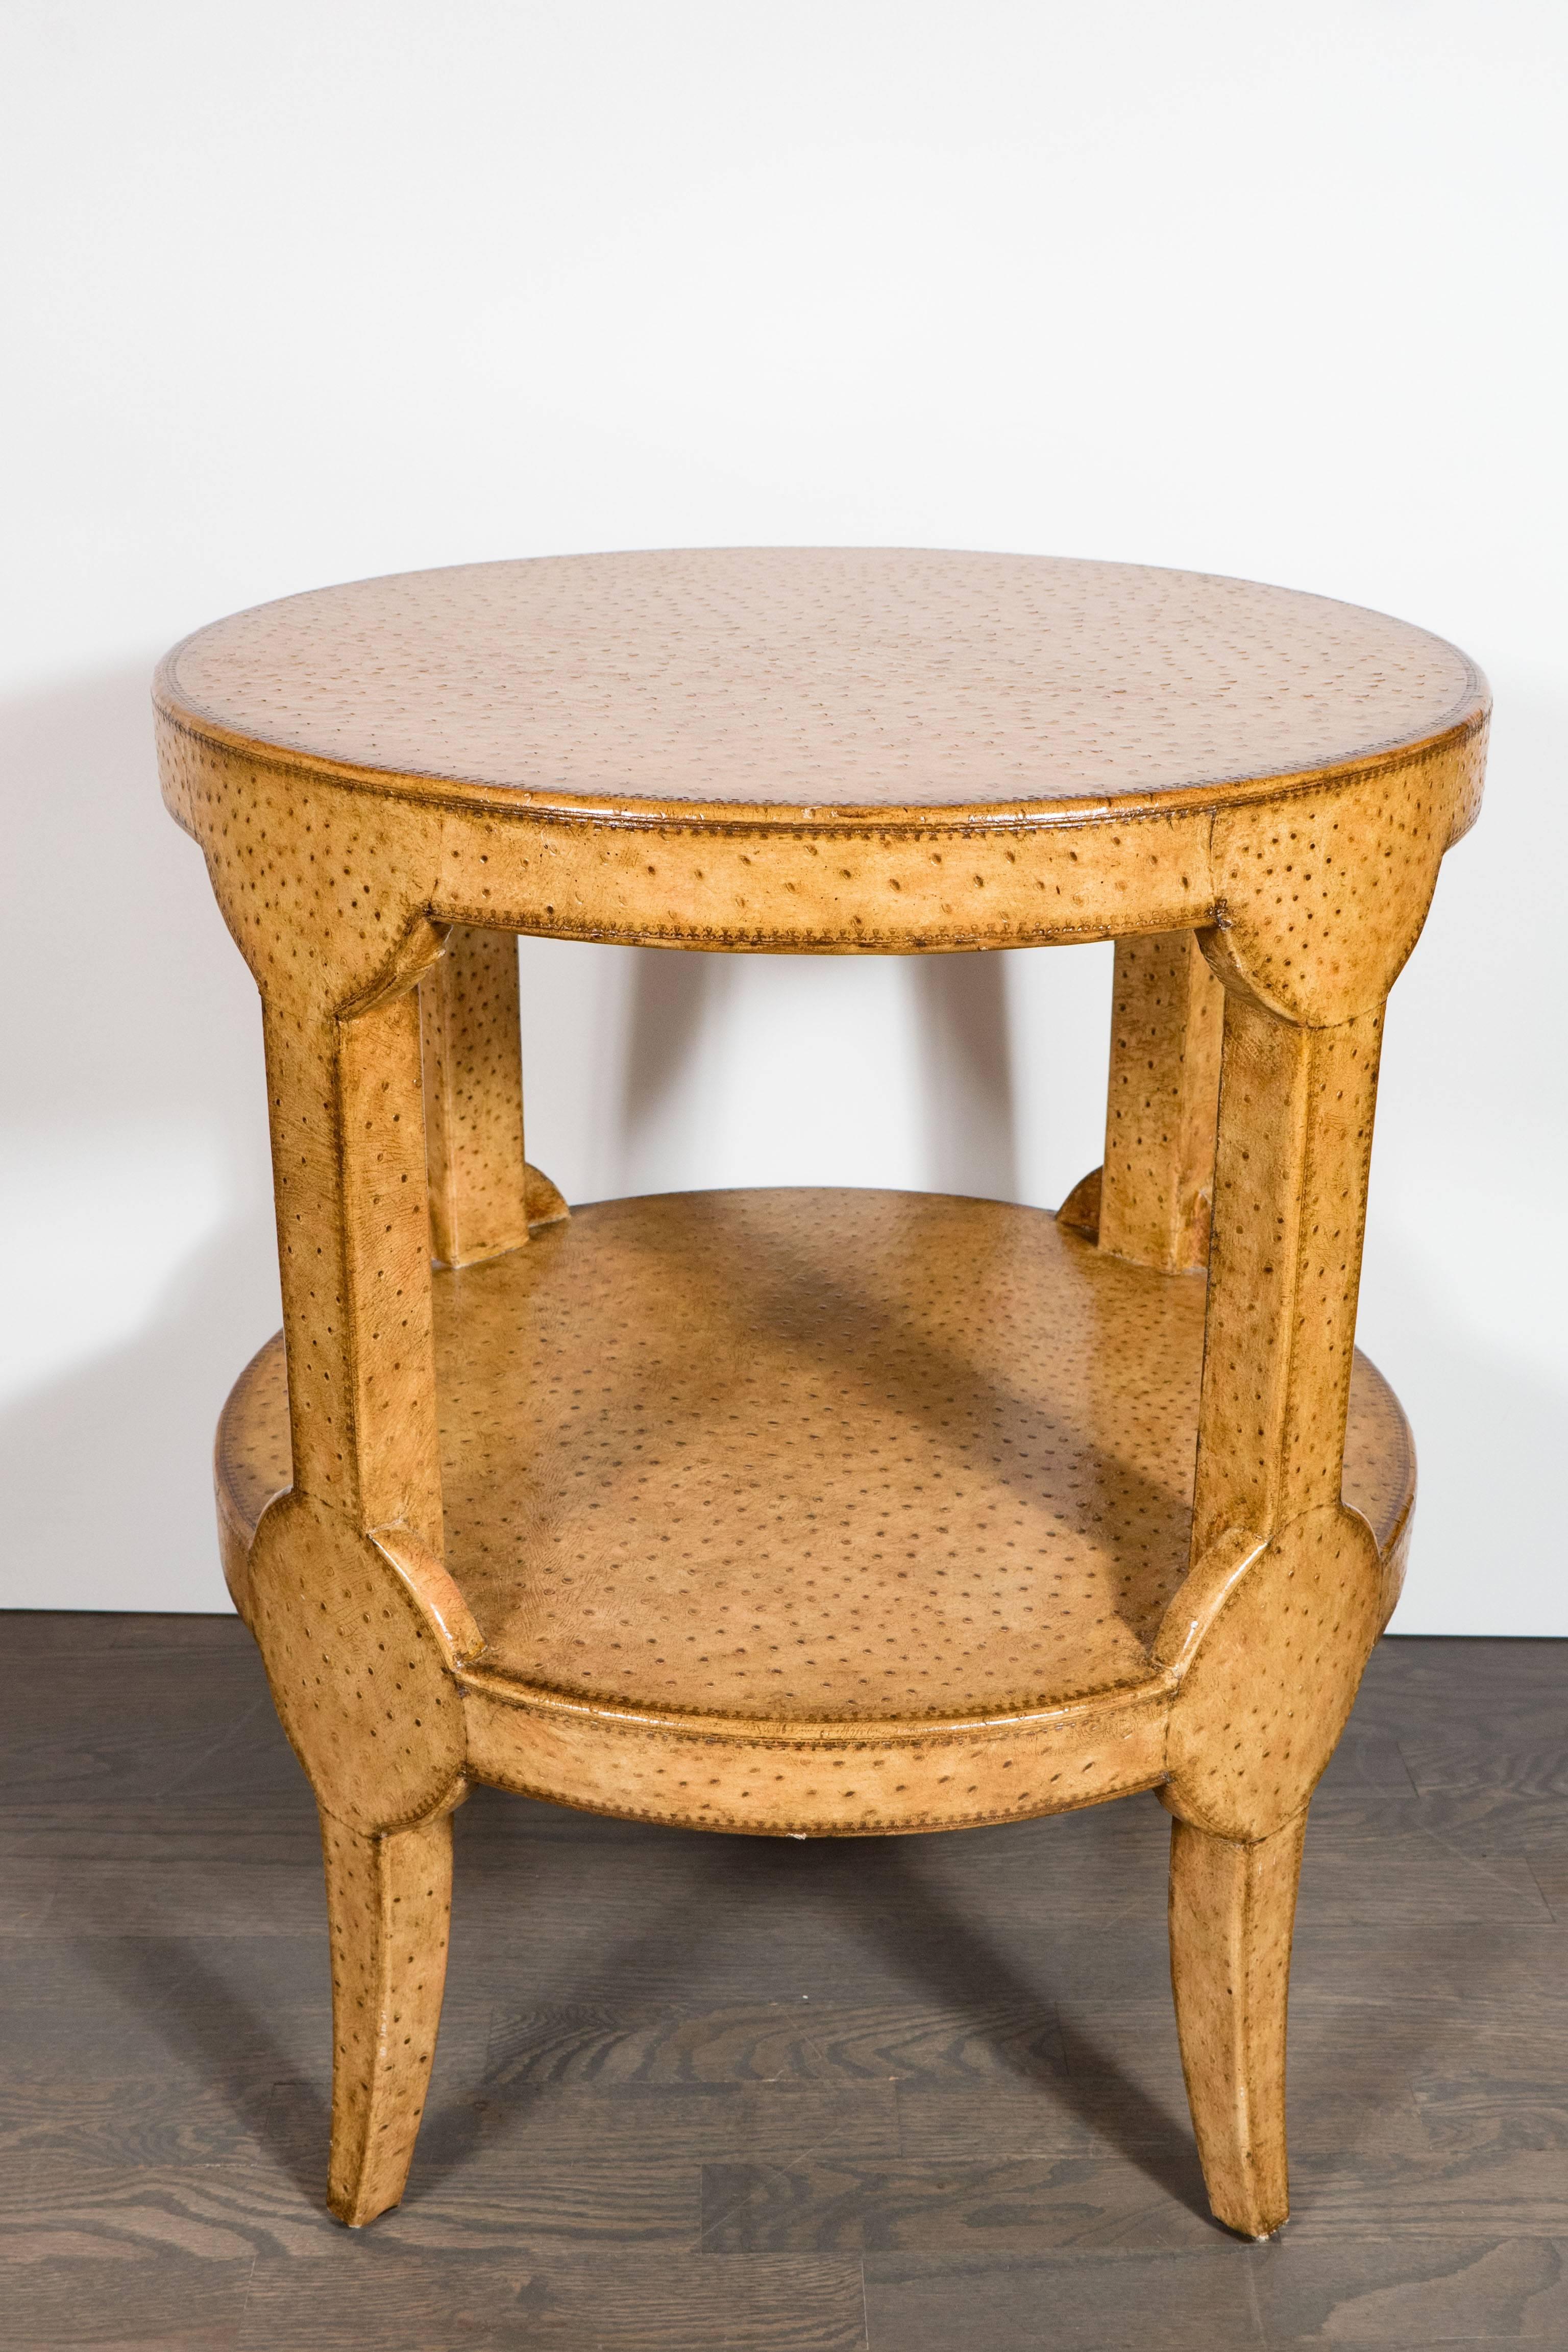 A Mid-Century Modernist two-tier ostrich leather gueridon side table. Fully covered in soft butterscotch-colored ostrich, slightly splayed legs support two circular tiers. Stitching along perimeter of the piece. Excellent craftsmanship and high